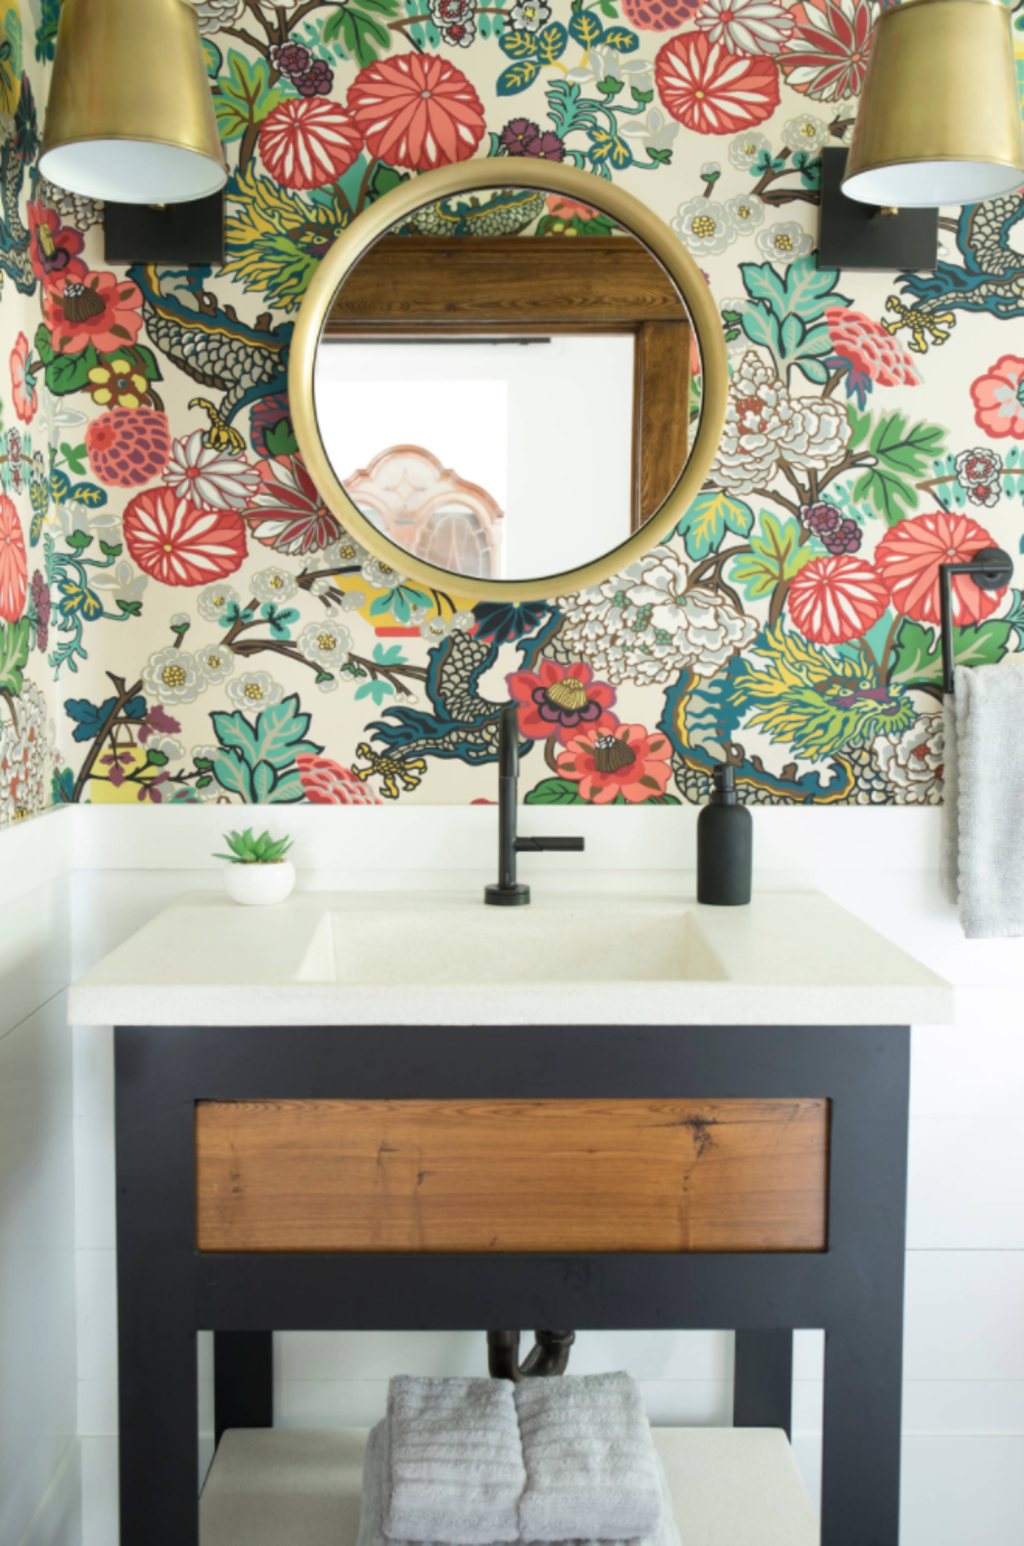 How To Choose A Bathroom Mirror You Ll Love, What Size Mirror